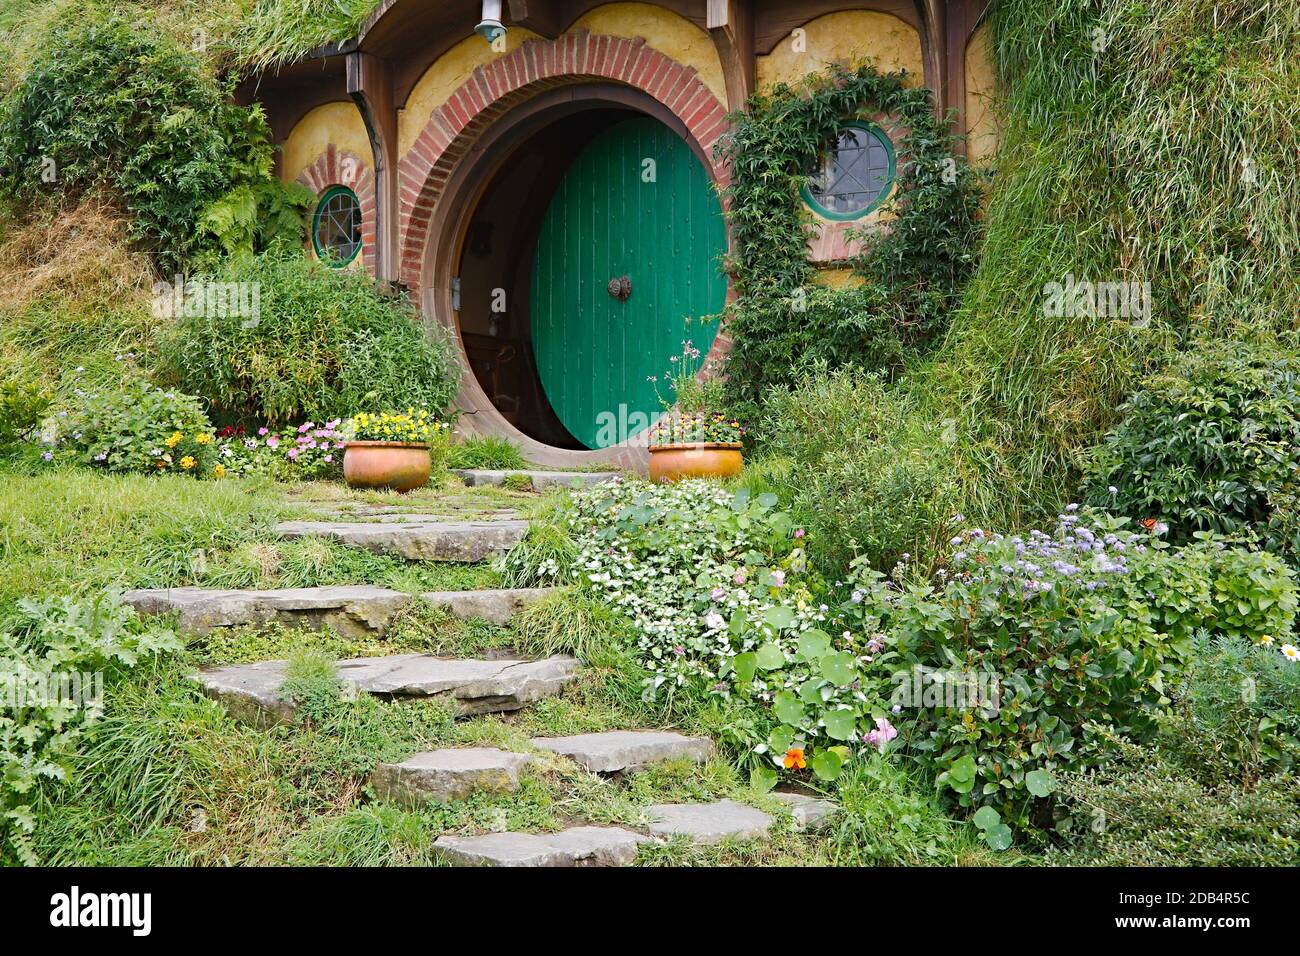 MATAMATA, NEW ZEALAND - APRIL 2, 2016: Movie set for the Lord of The Rings and The Hobbit. Bilbo Baggins house. Stock Photo